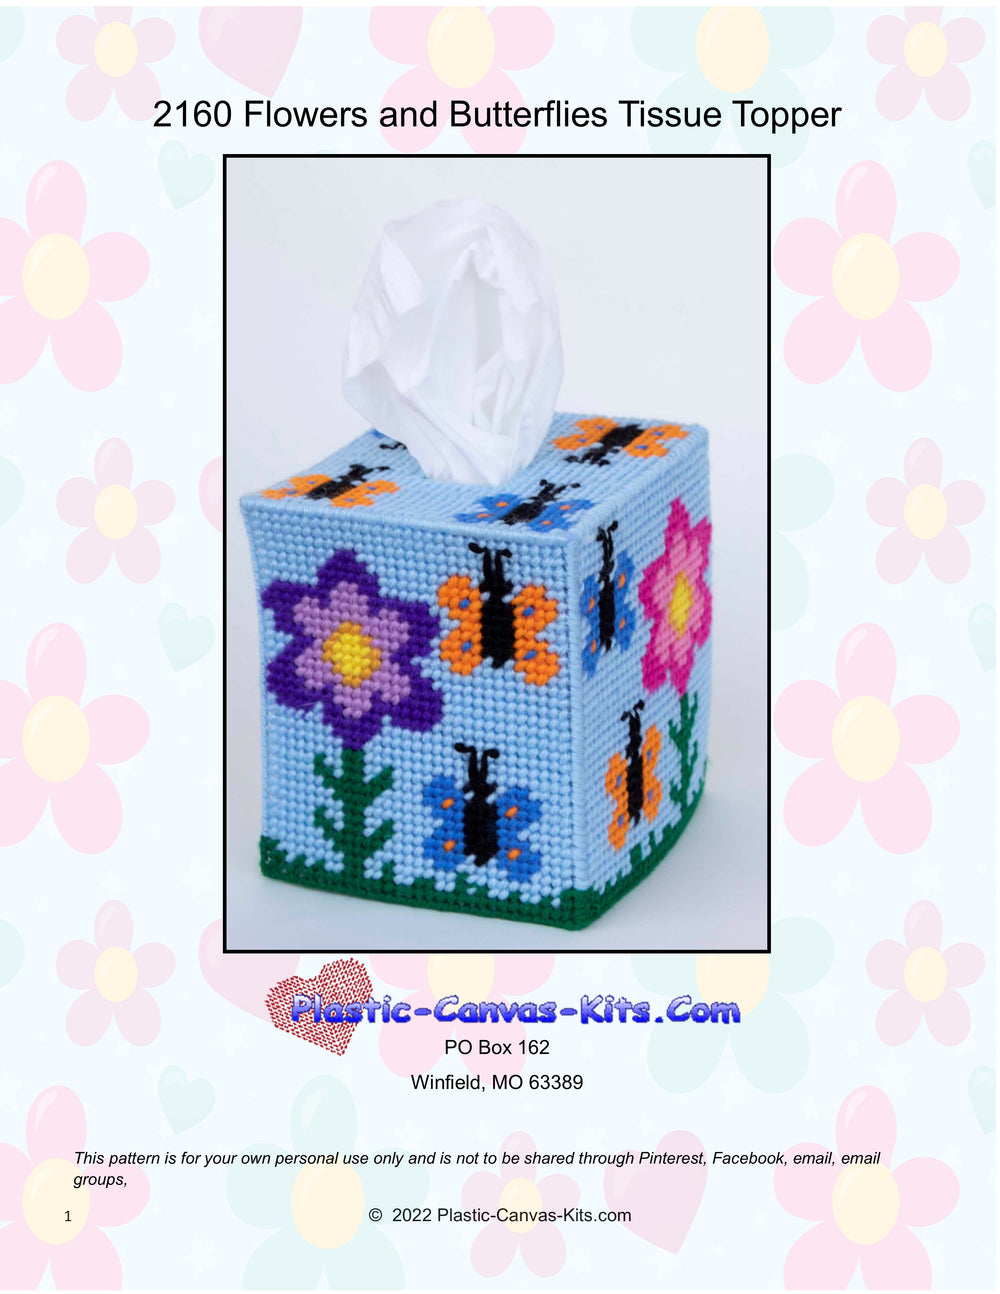 Flowers and Ladybugs Spring Tissue Topper-Plastic Canvas Pattern or Kit